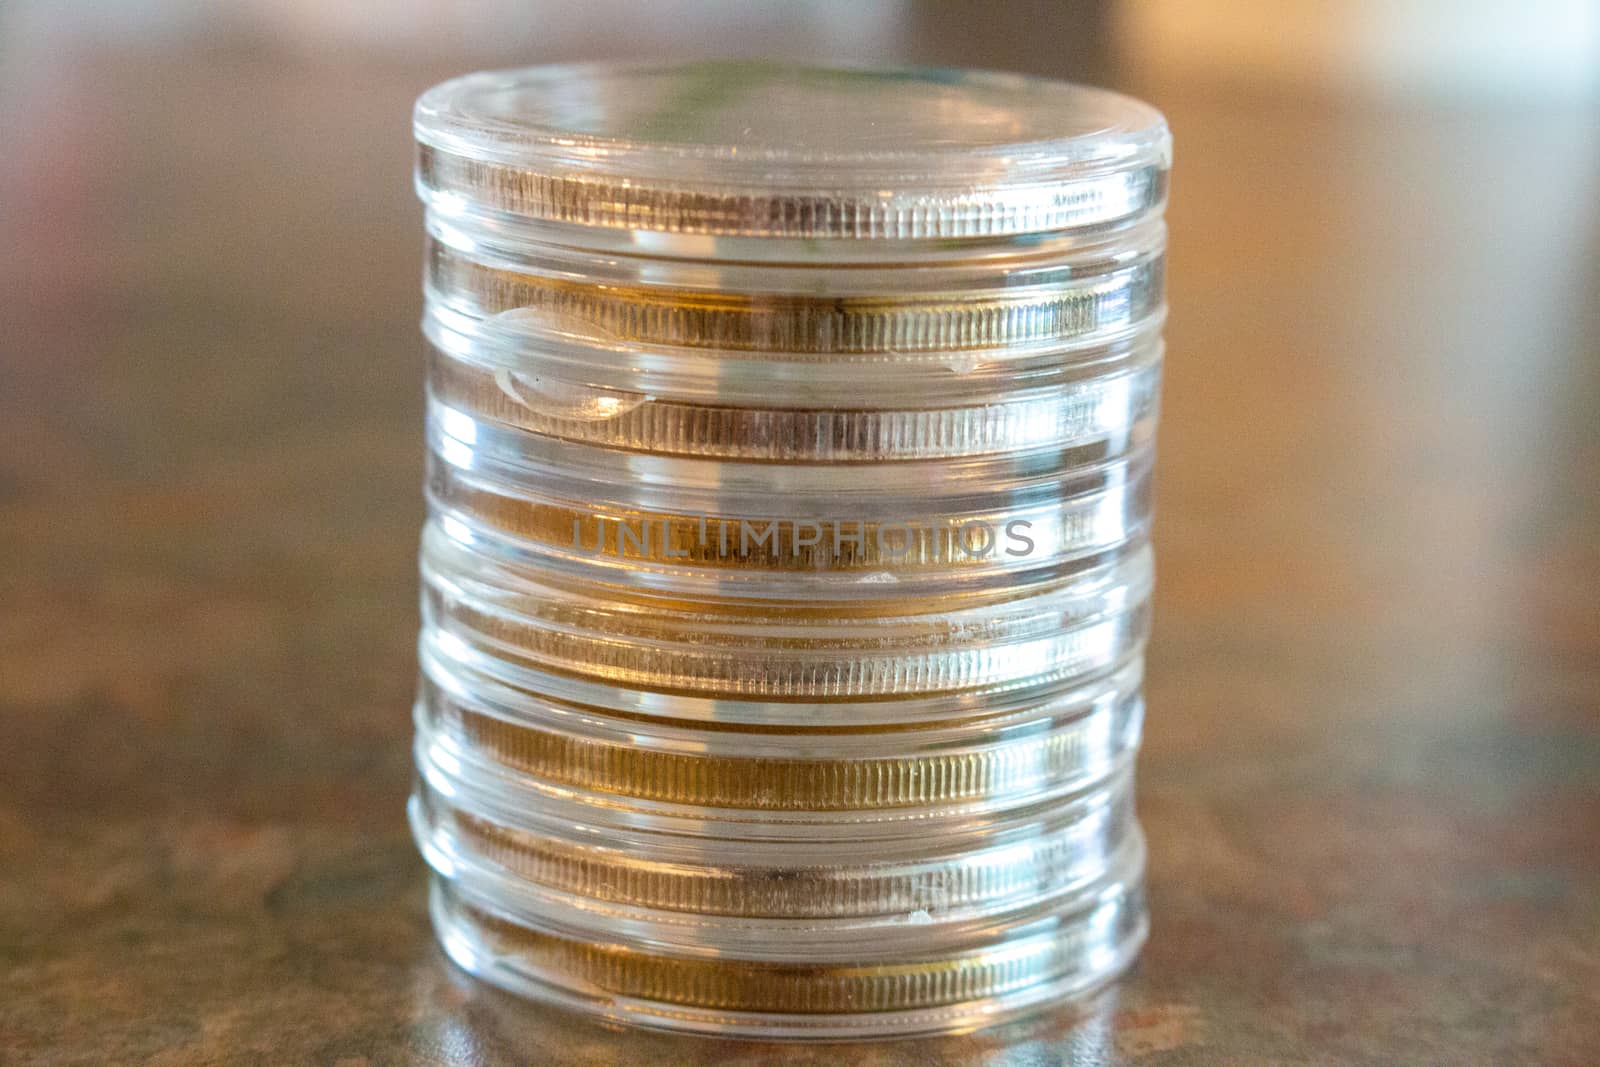 Wealth represented by silver coins and bars money. by mynewturtle1